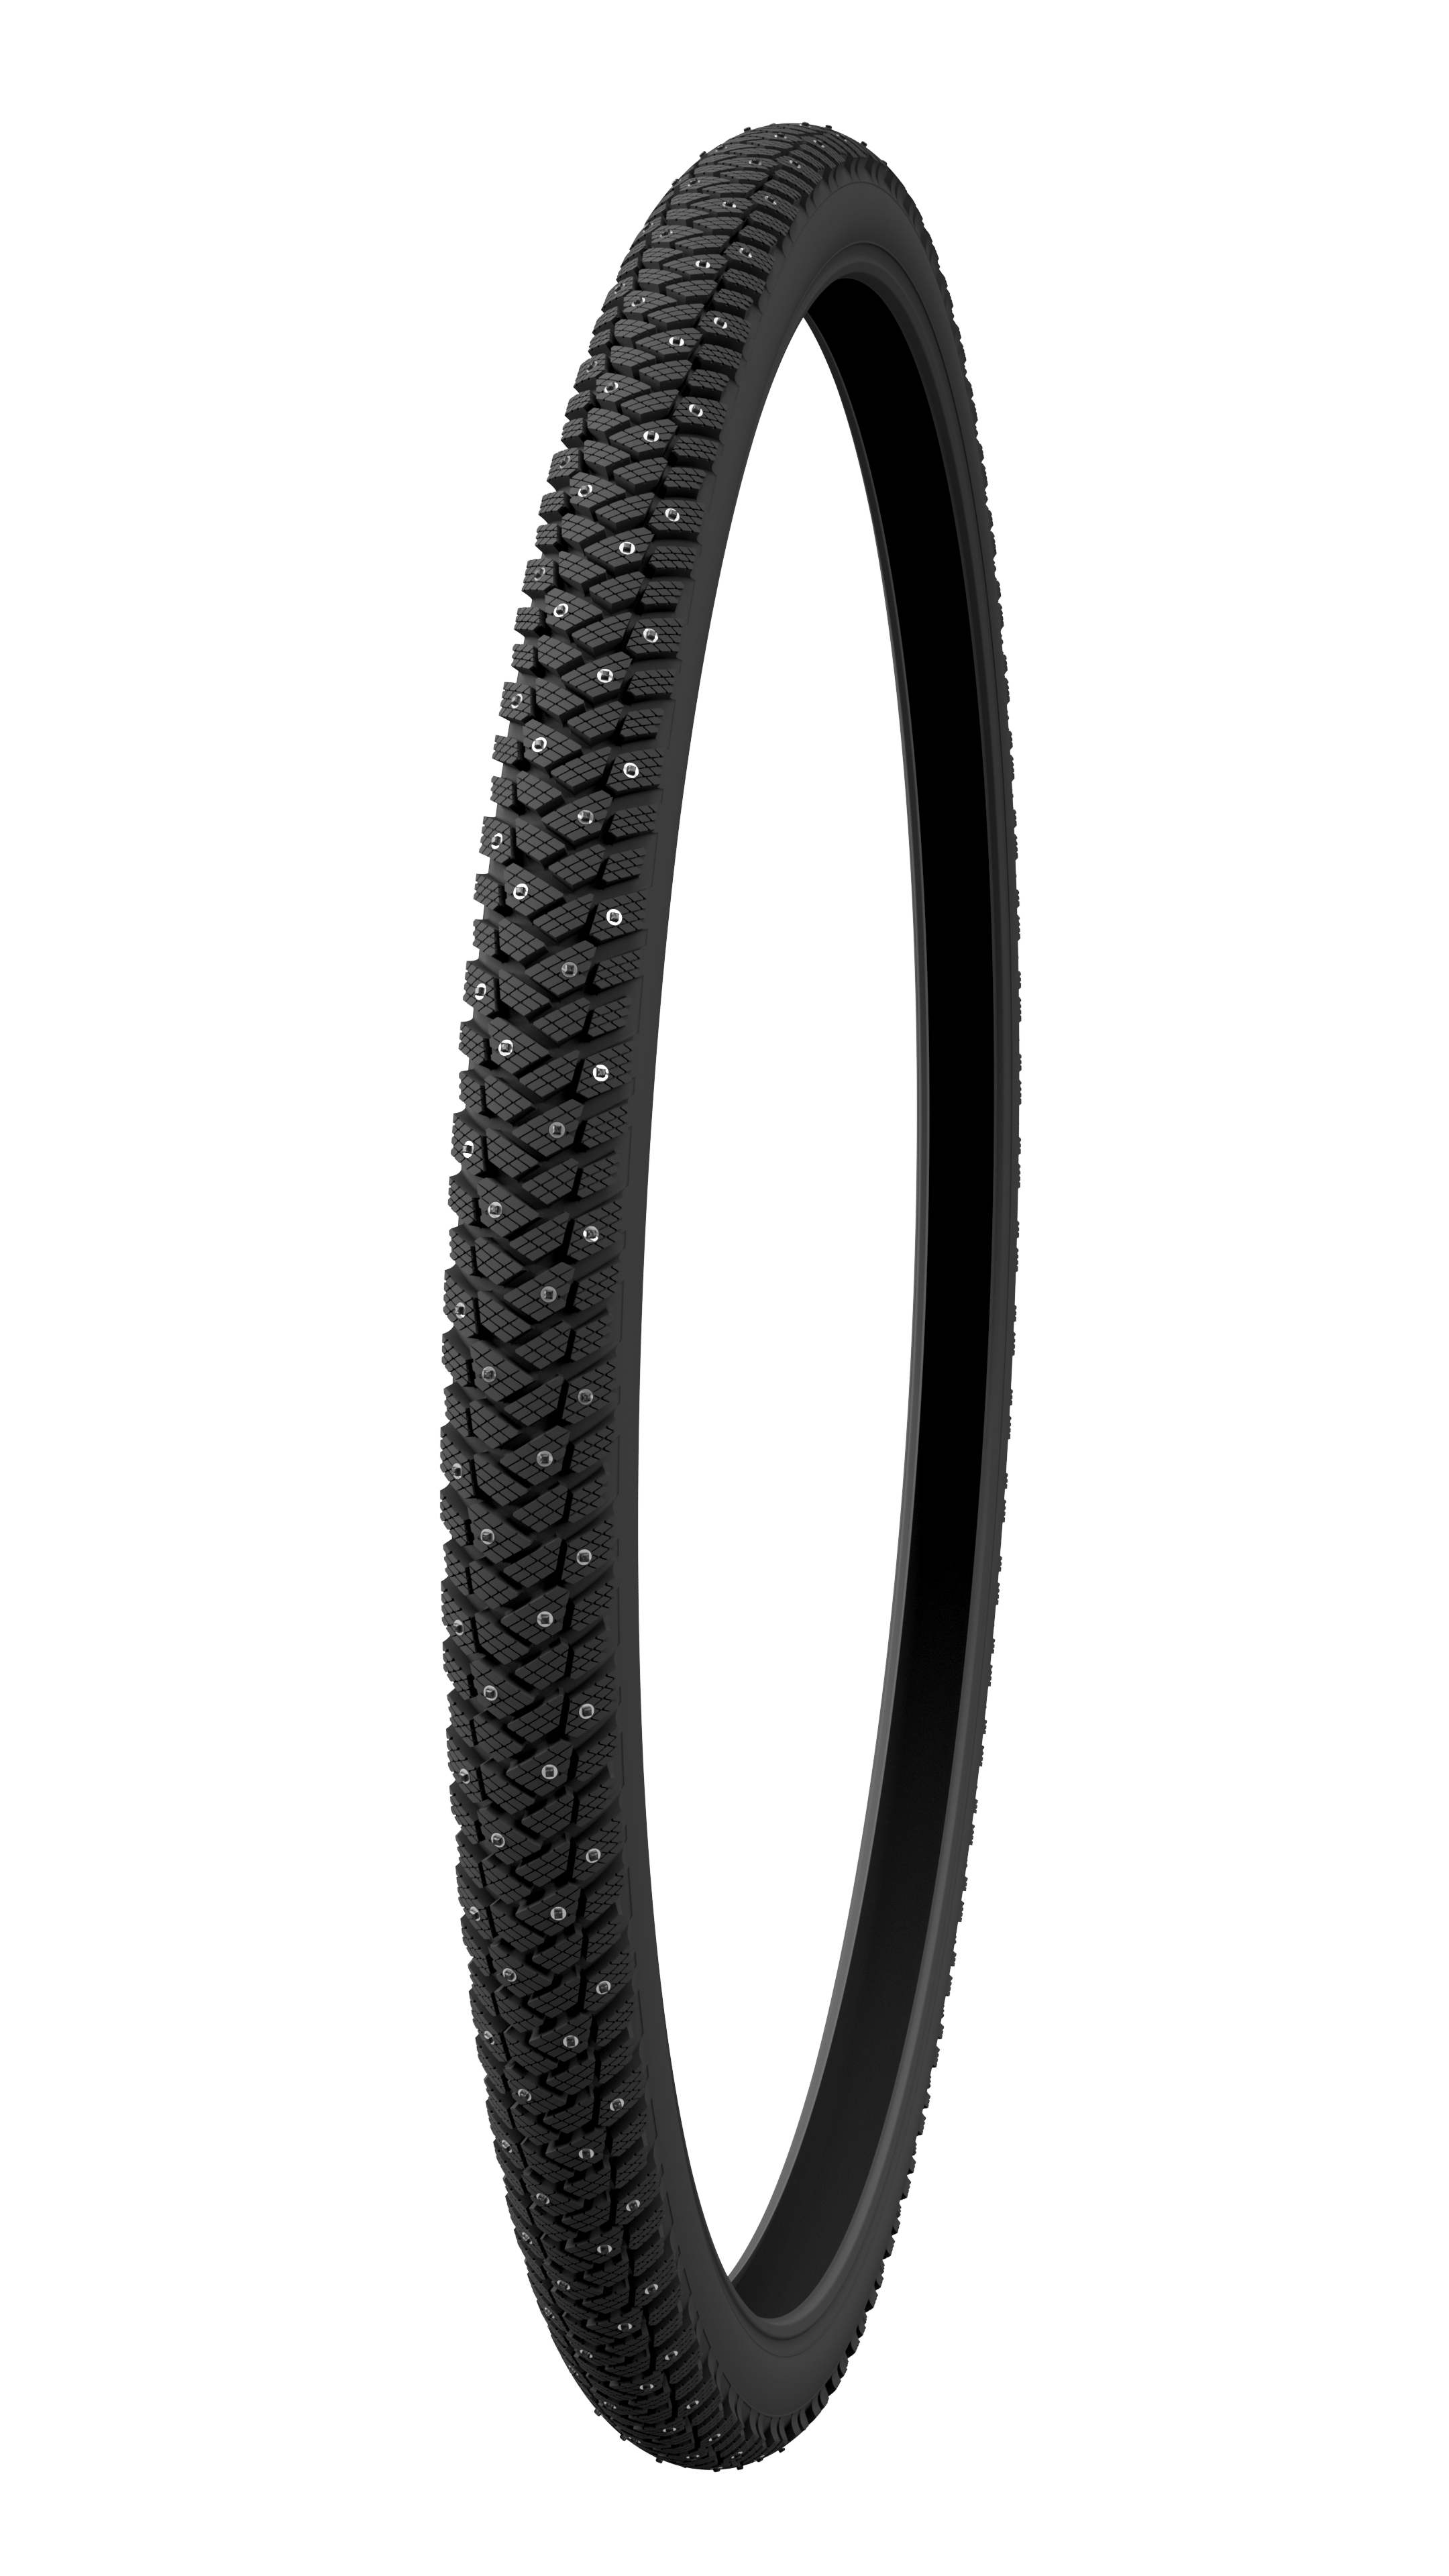 Suomi Tyres Routa W212 TLR, 47-507